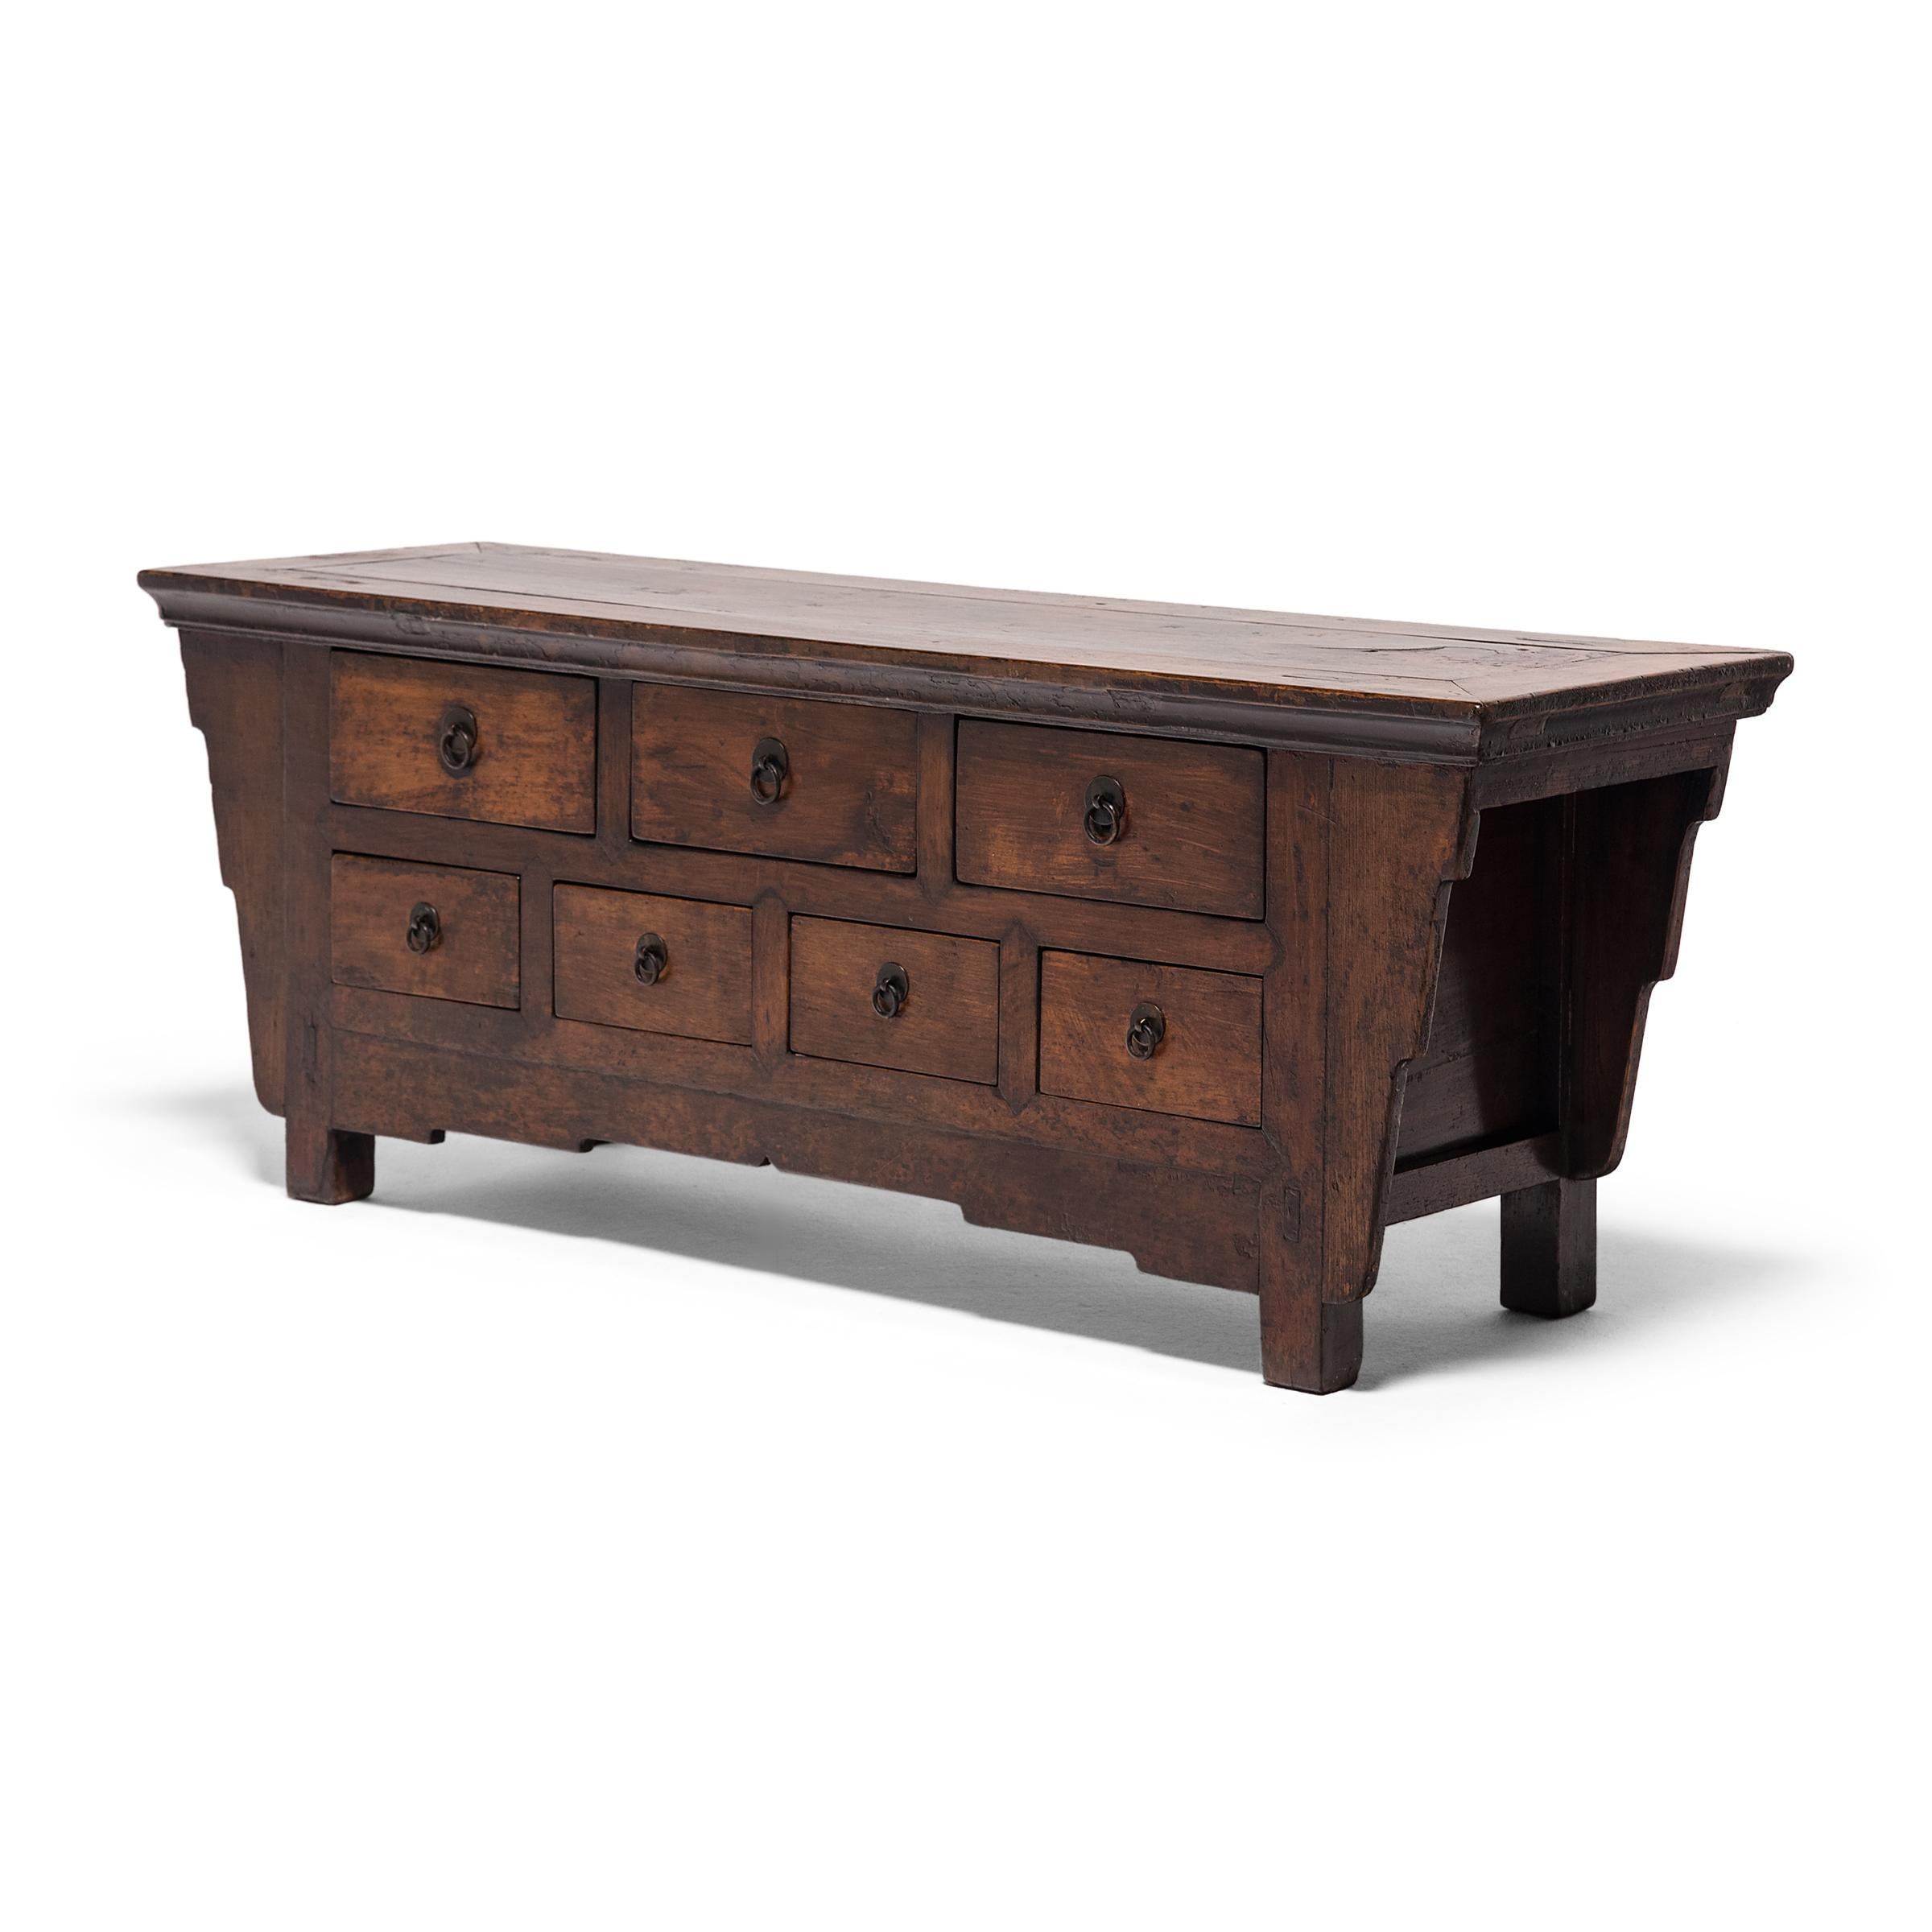 This low seven-drawer chest dates to the late 19th century and is crafted of northern elm (yumu) using traditional mortise-and-tenon joinery methods. The low cabinet features seven drawers enclosed by a stepped apron and an expansive floating-panel